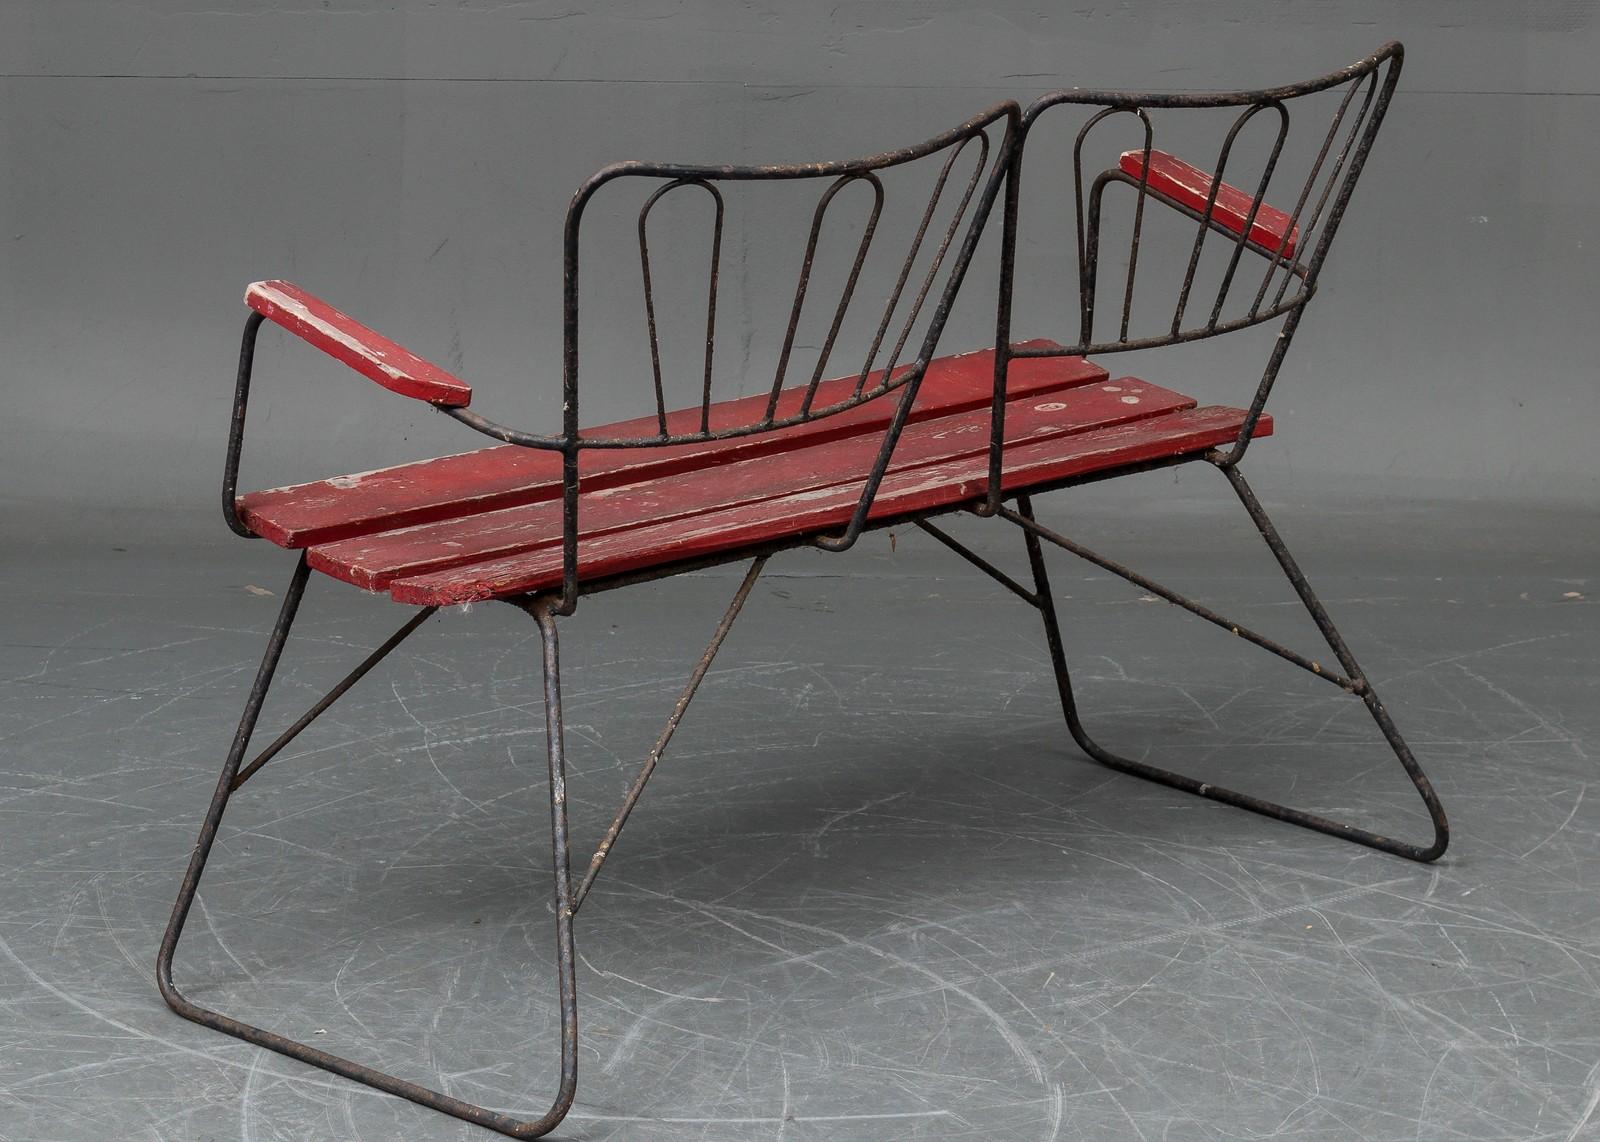 Steel frame with wood slats, made in Denmark in the 1950s.
Delivery time 2-3 weeks.